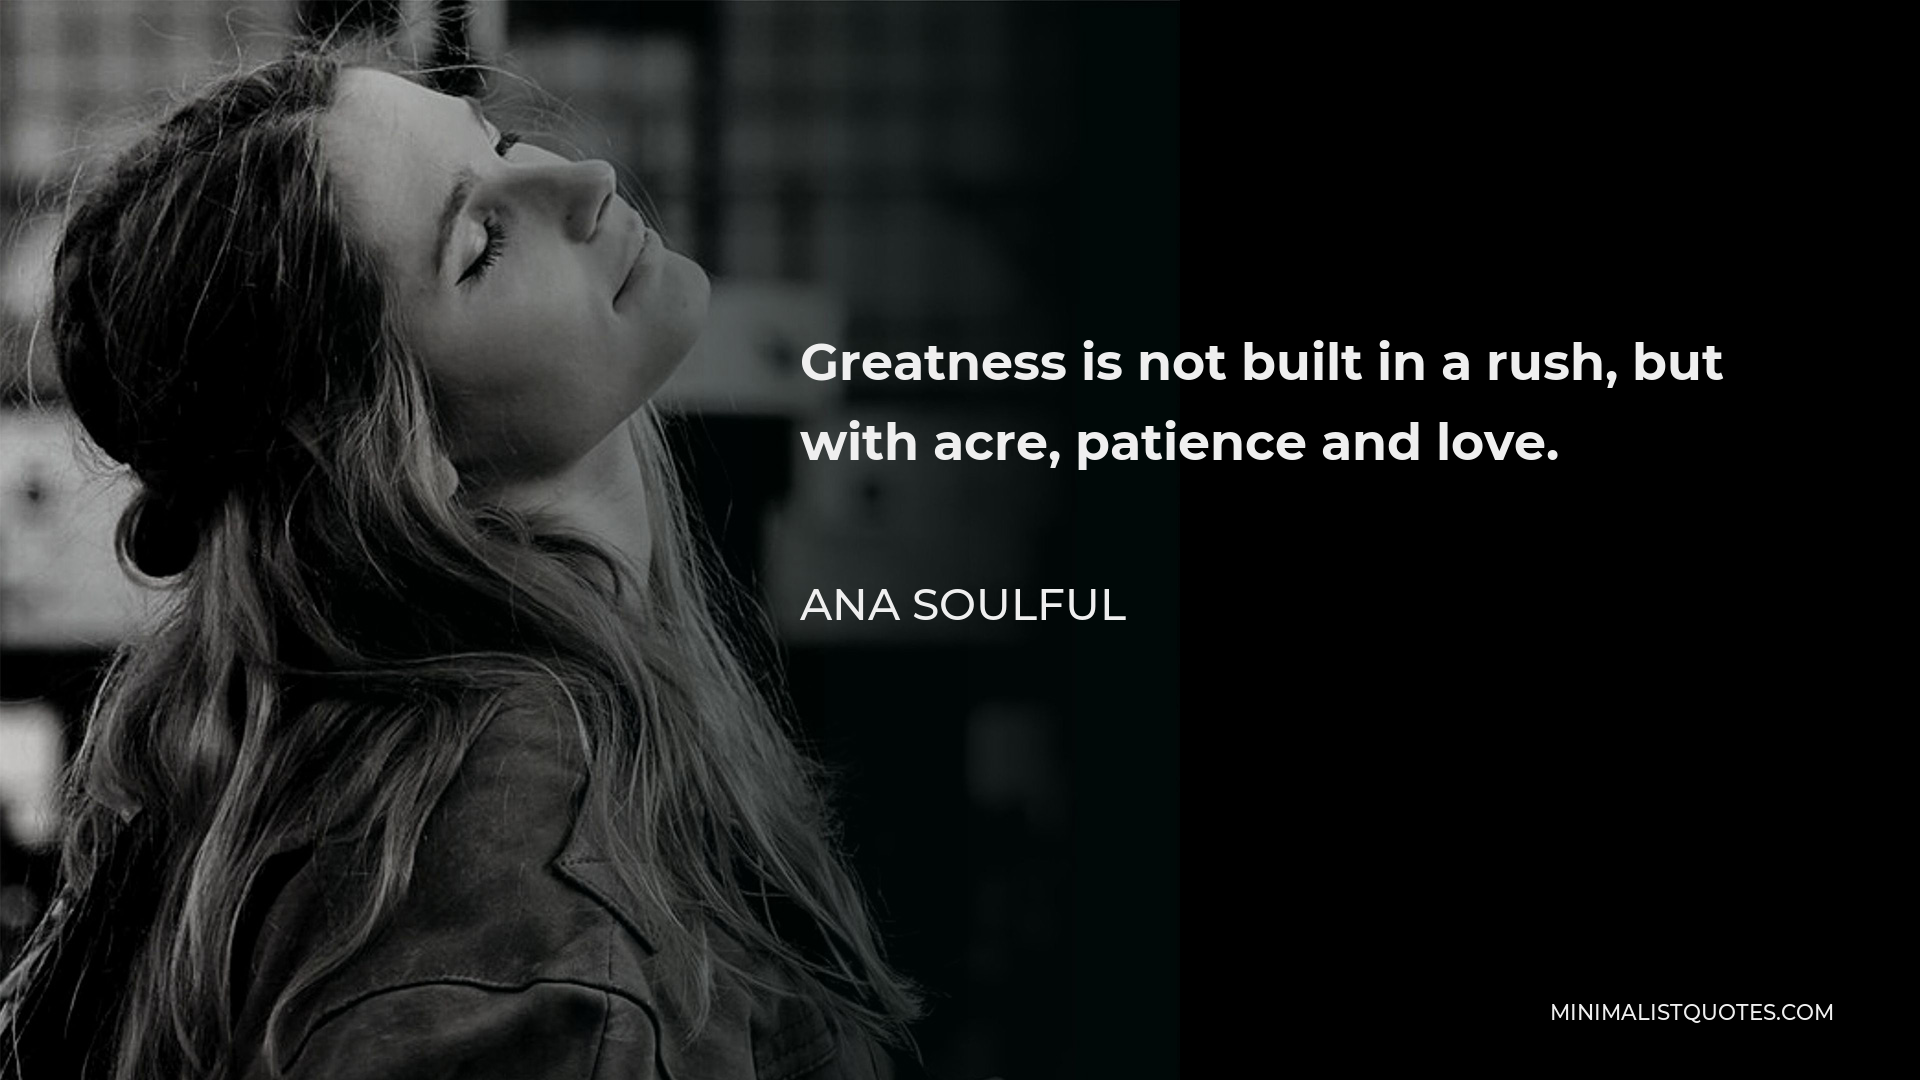 Ana Soulful Quote - Greatness is not built in a rush, but with acre, patience and love.